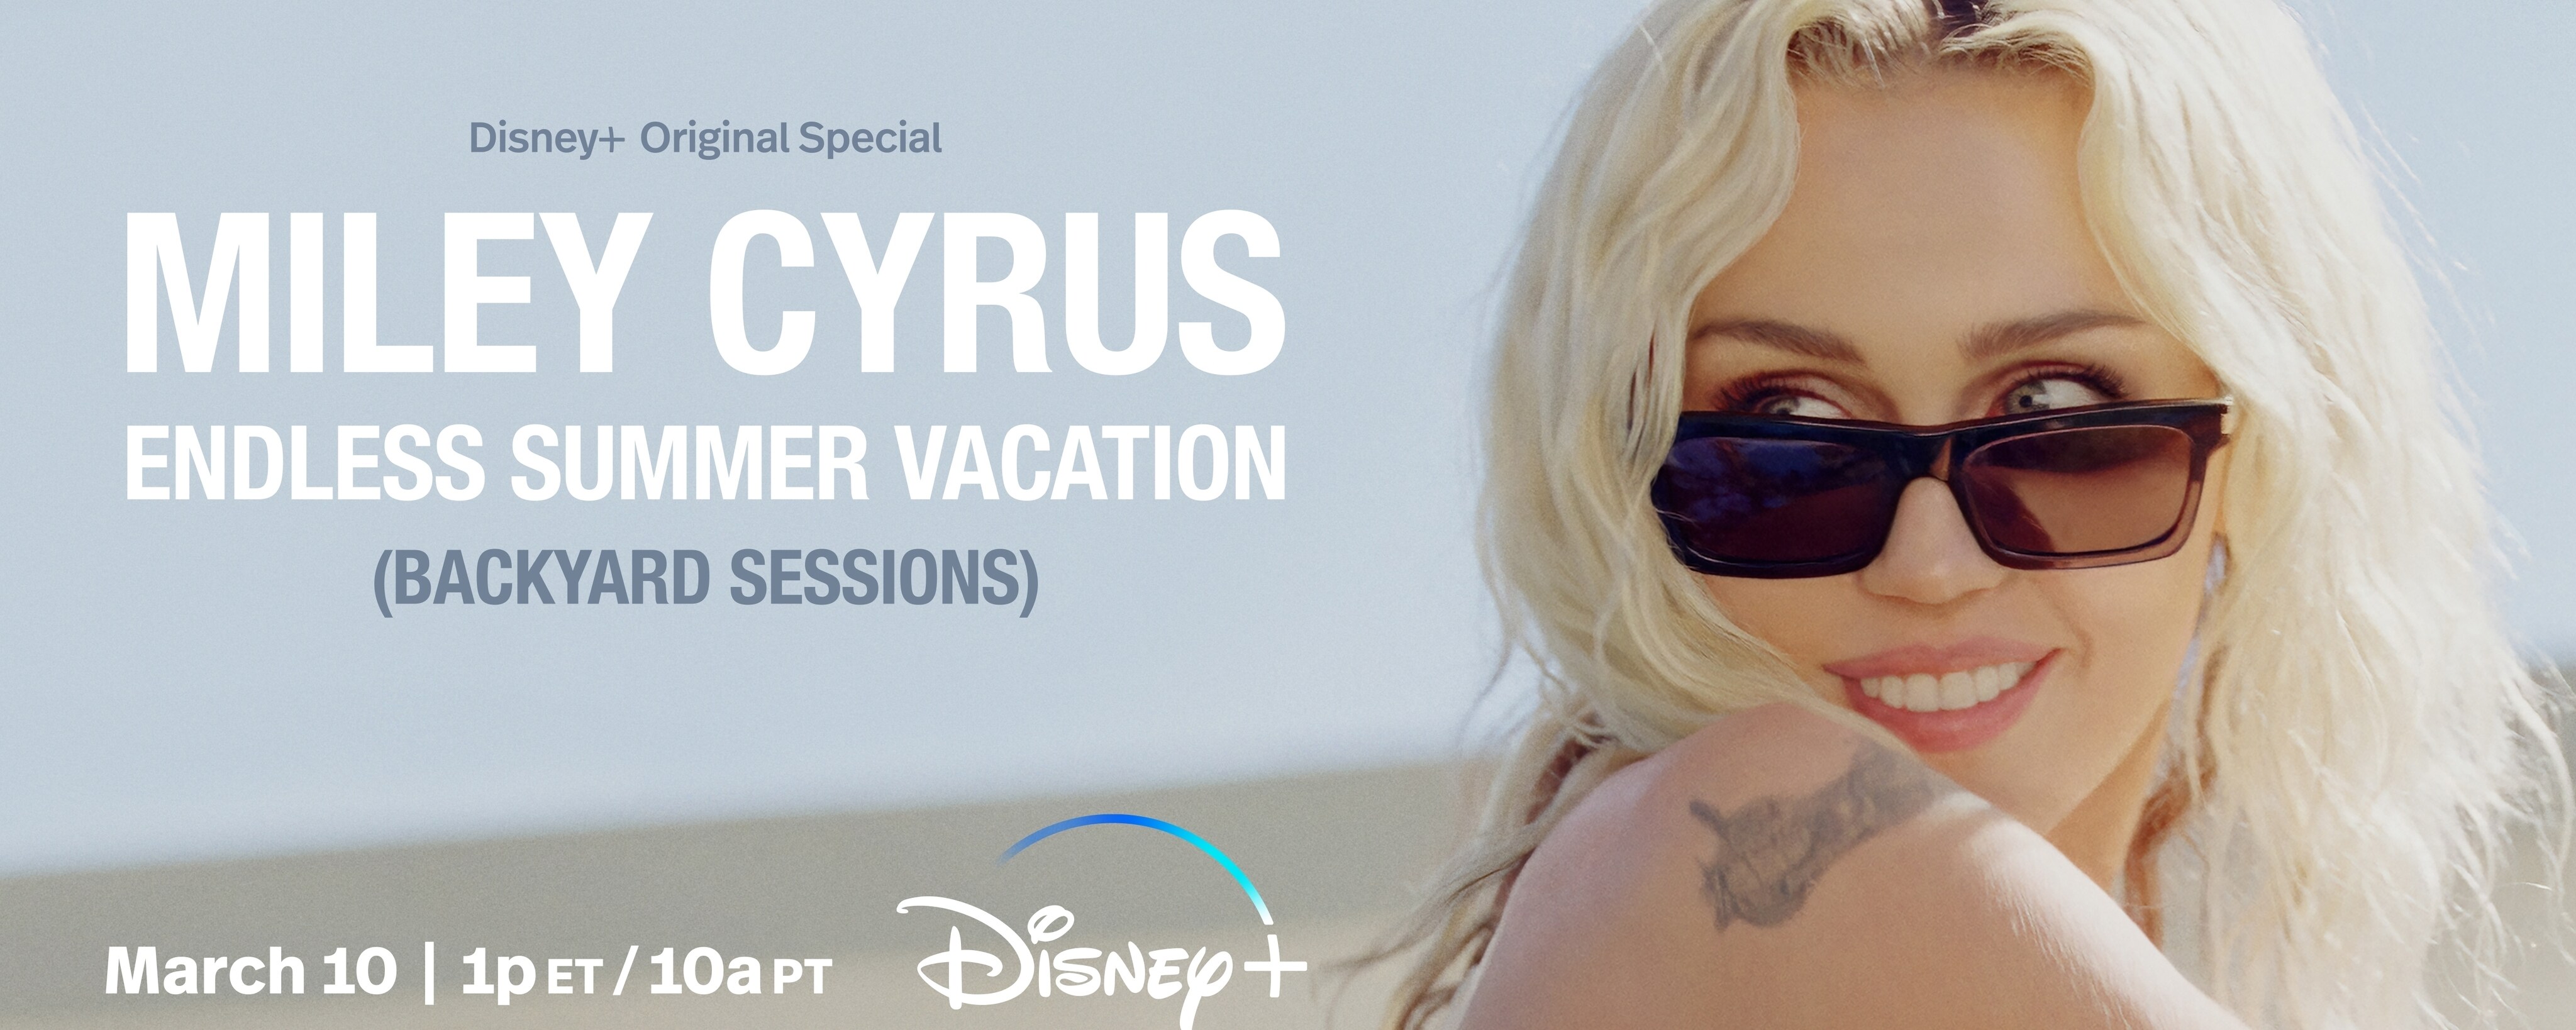 Miley Cyrus Endless Summer Vacation Backyard Sessions Disney Plus Album  Cover Poster Print 2023 sold by Occupied Rhizome, SKU 40478417